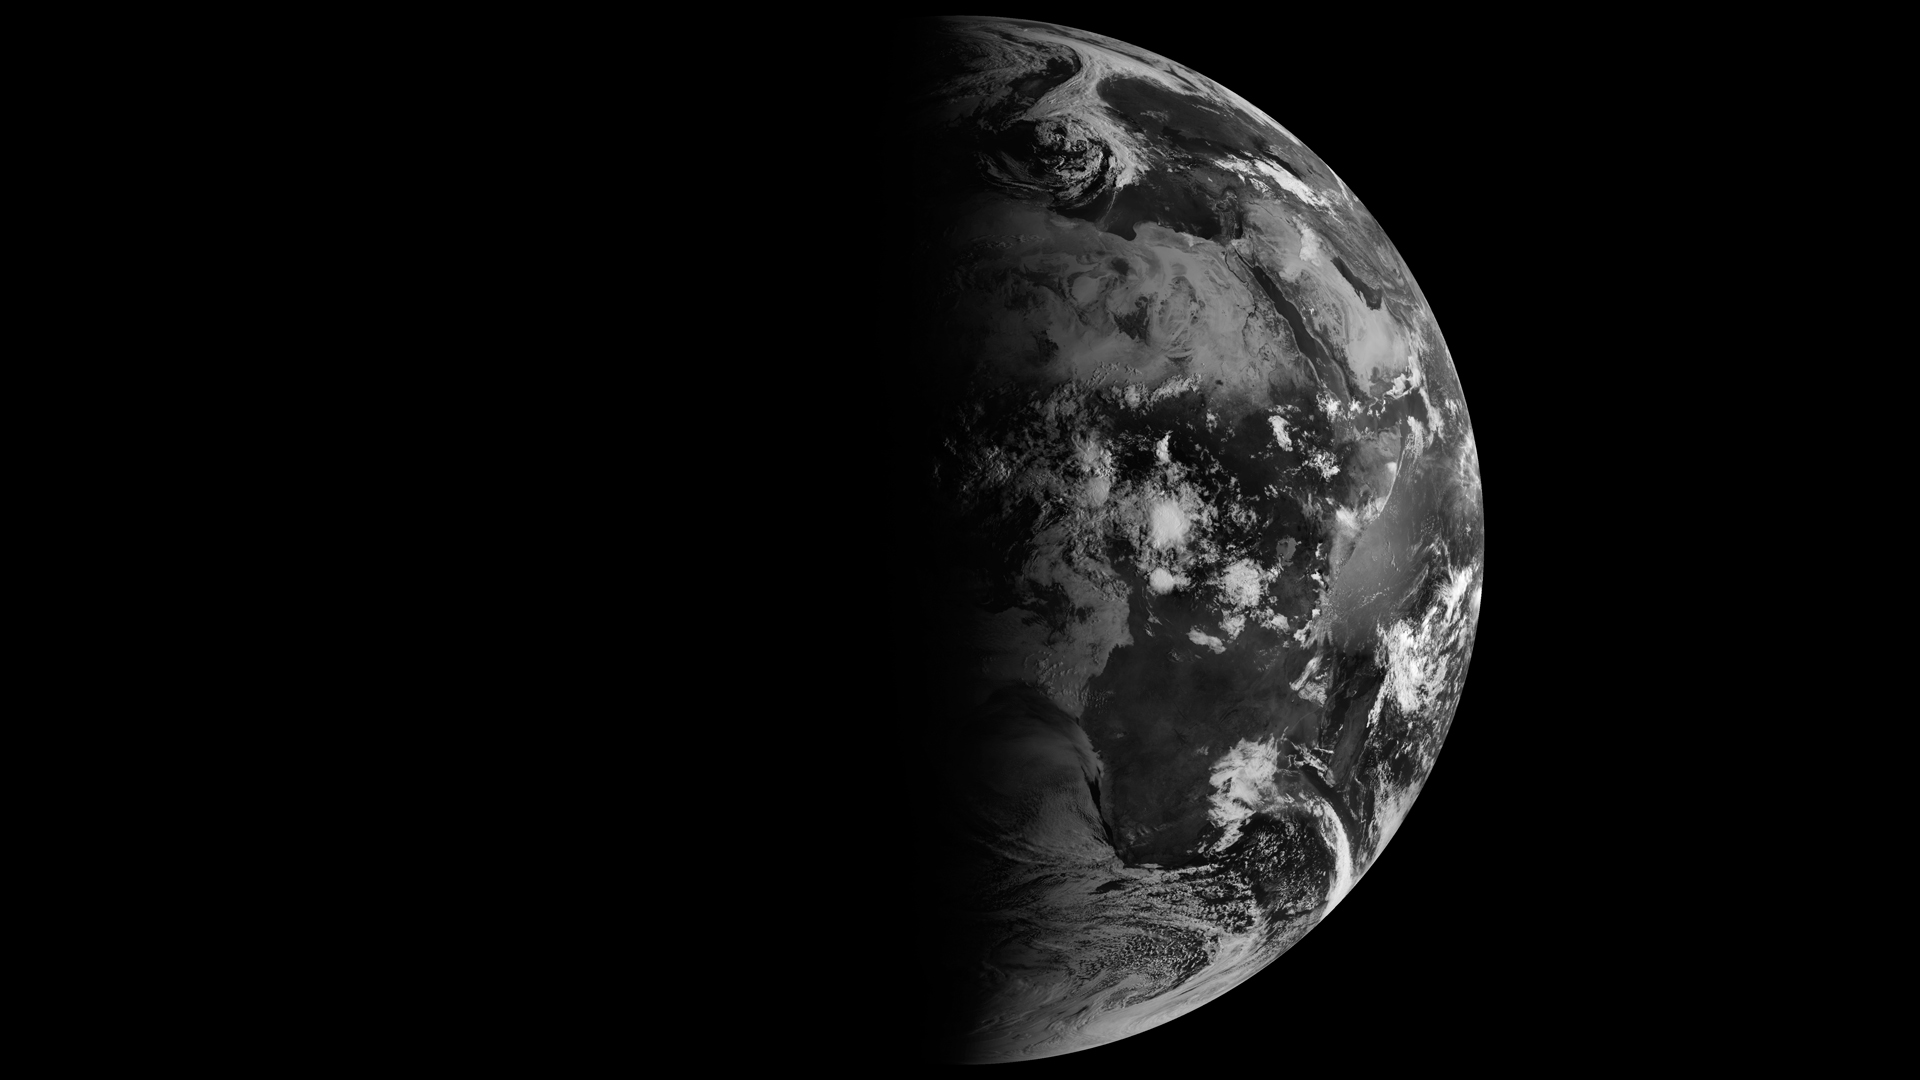 On the September equinox, the terminator is a north-south line, and the sun is said to sit directly above the equator. CREDIT: NASA's Earth Observatory